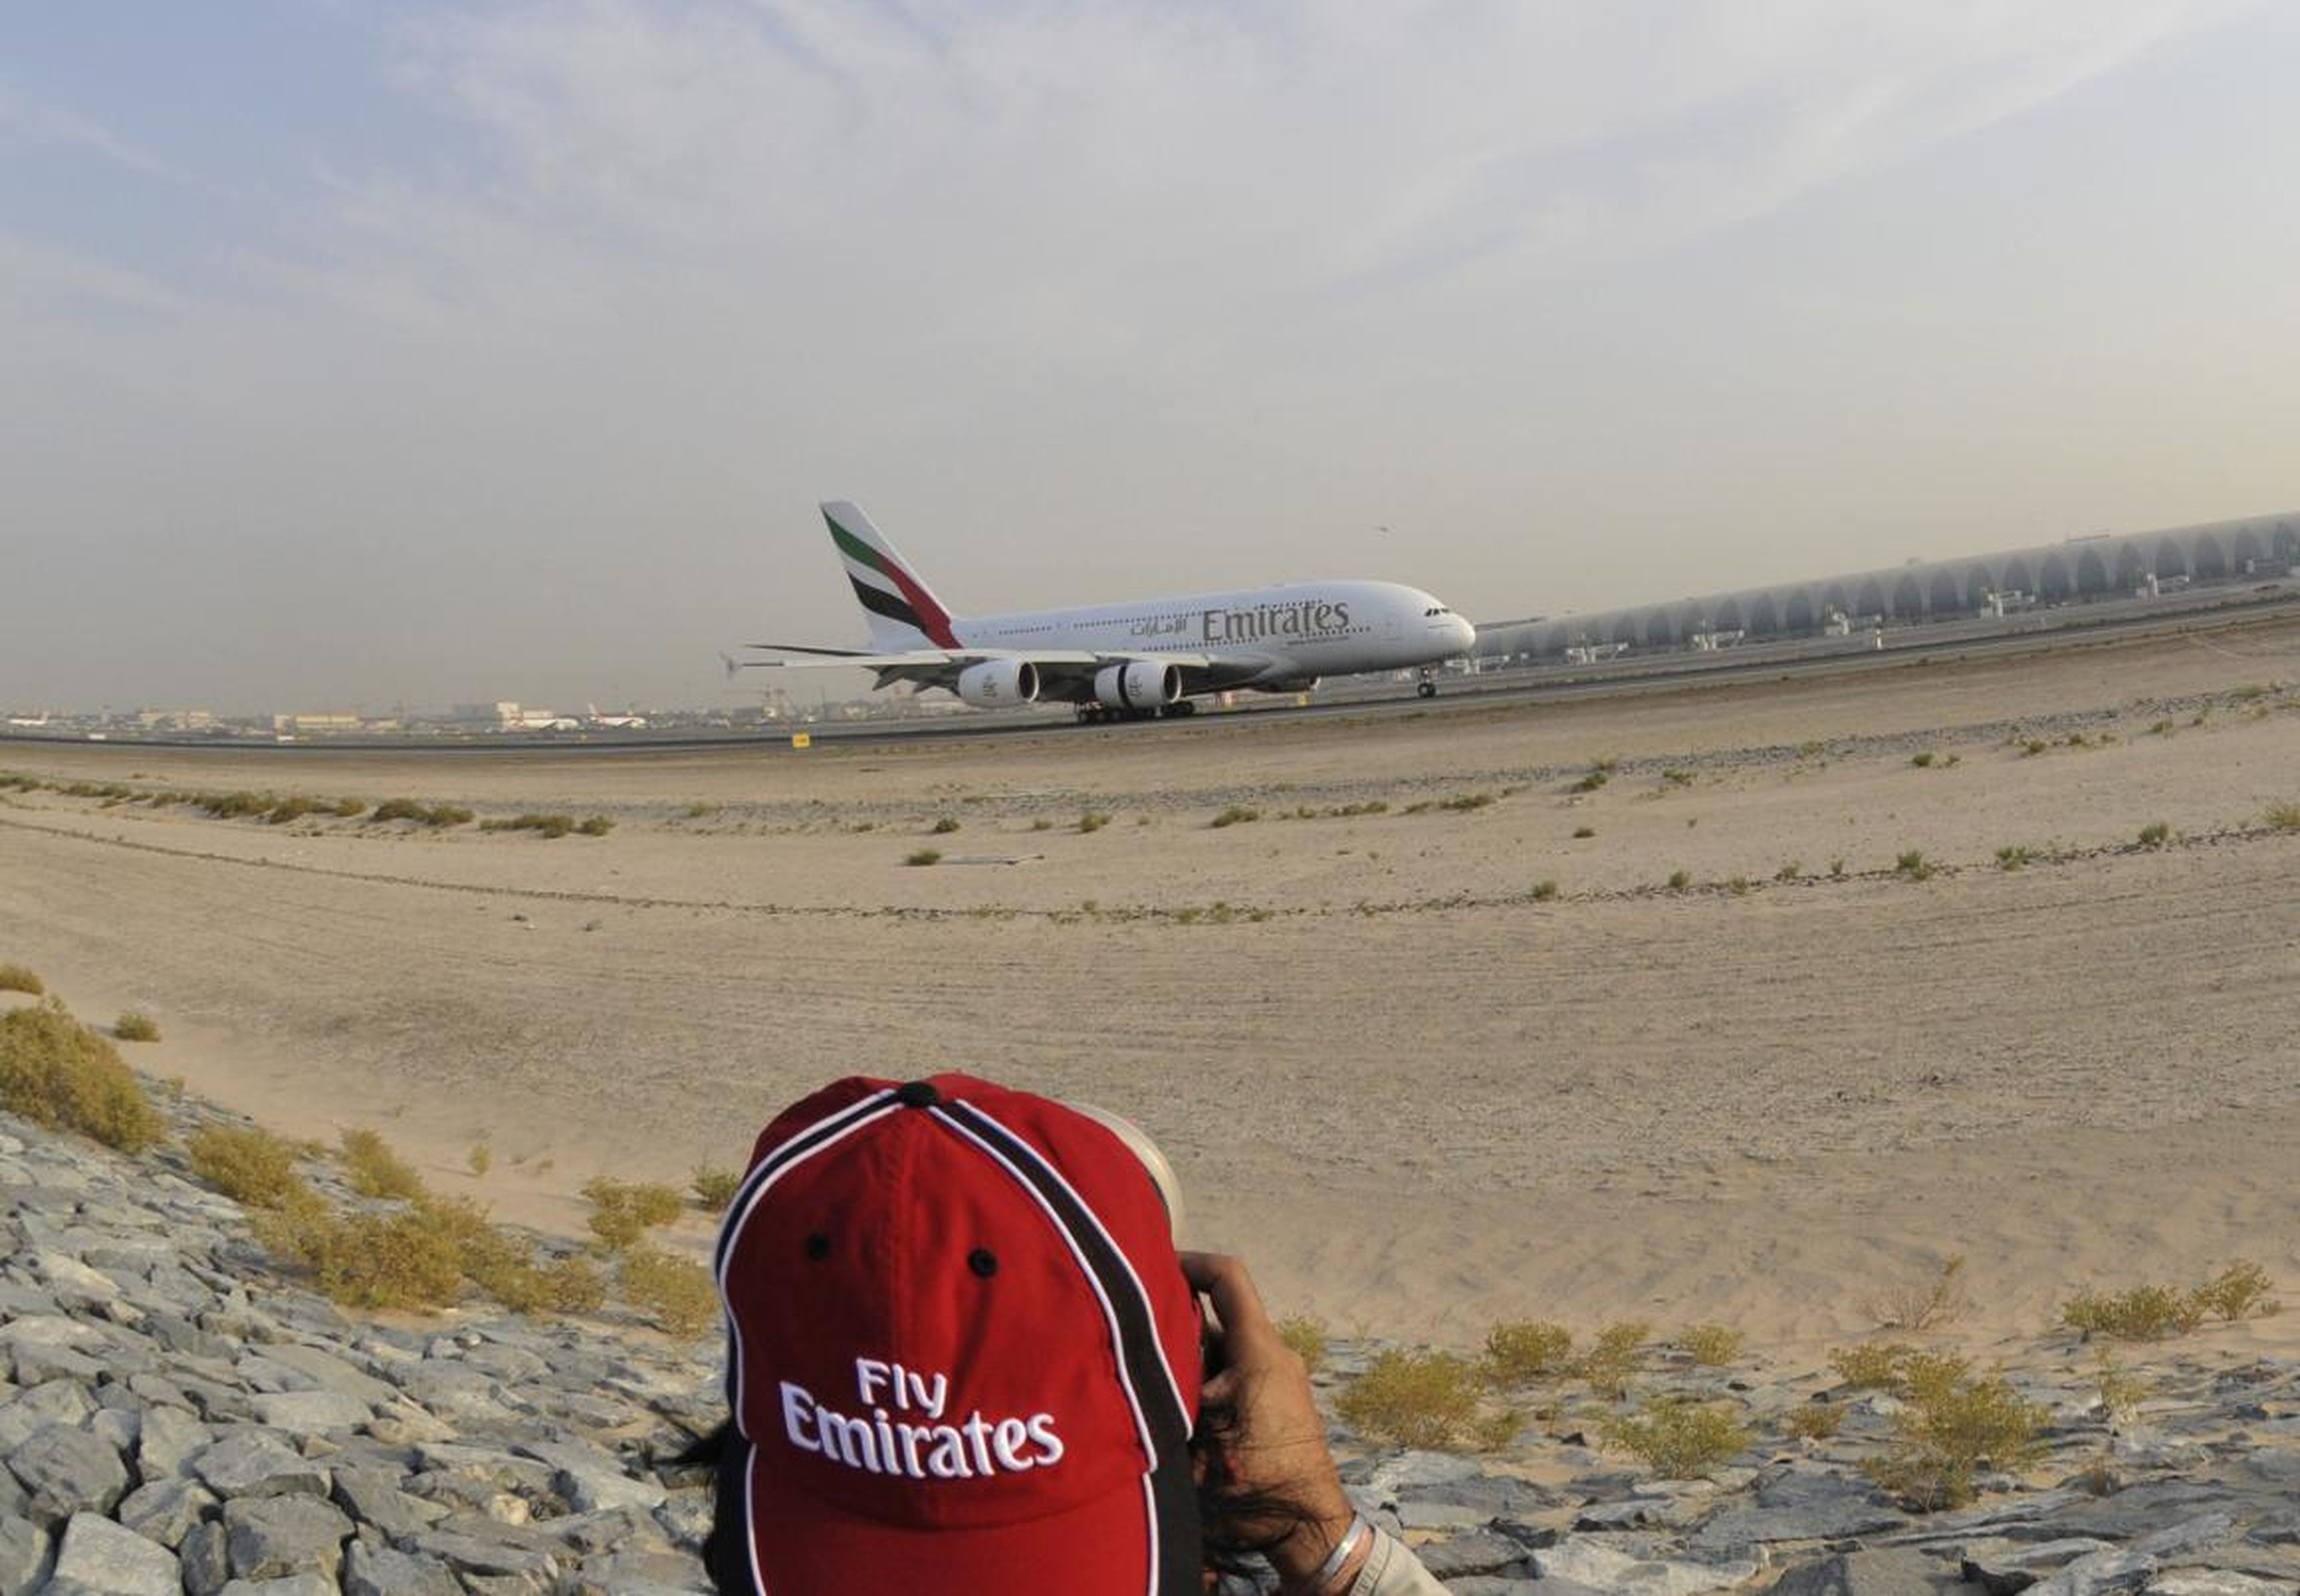 Why does Emirates love the A380 so much, at a time when most of the airlines in the world have stayed away?